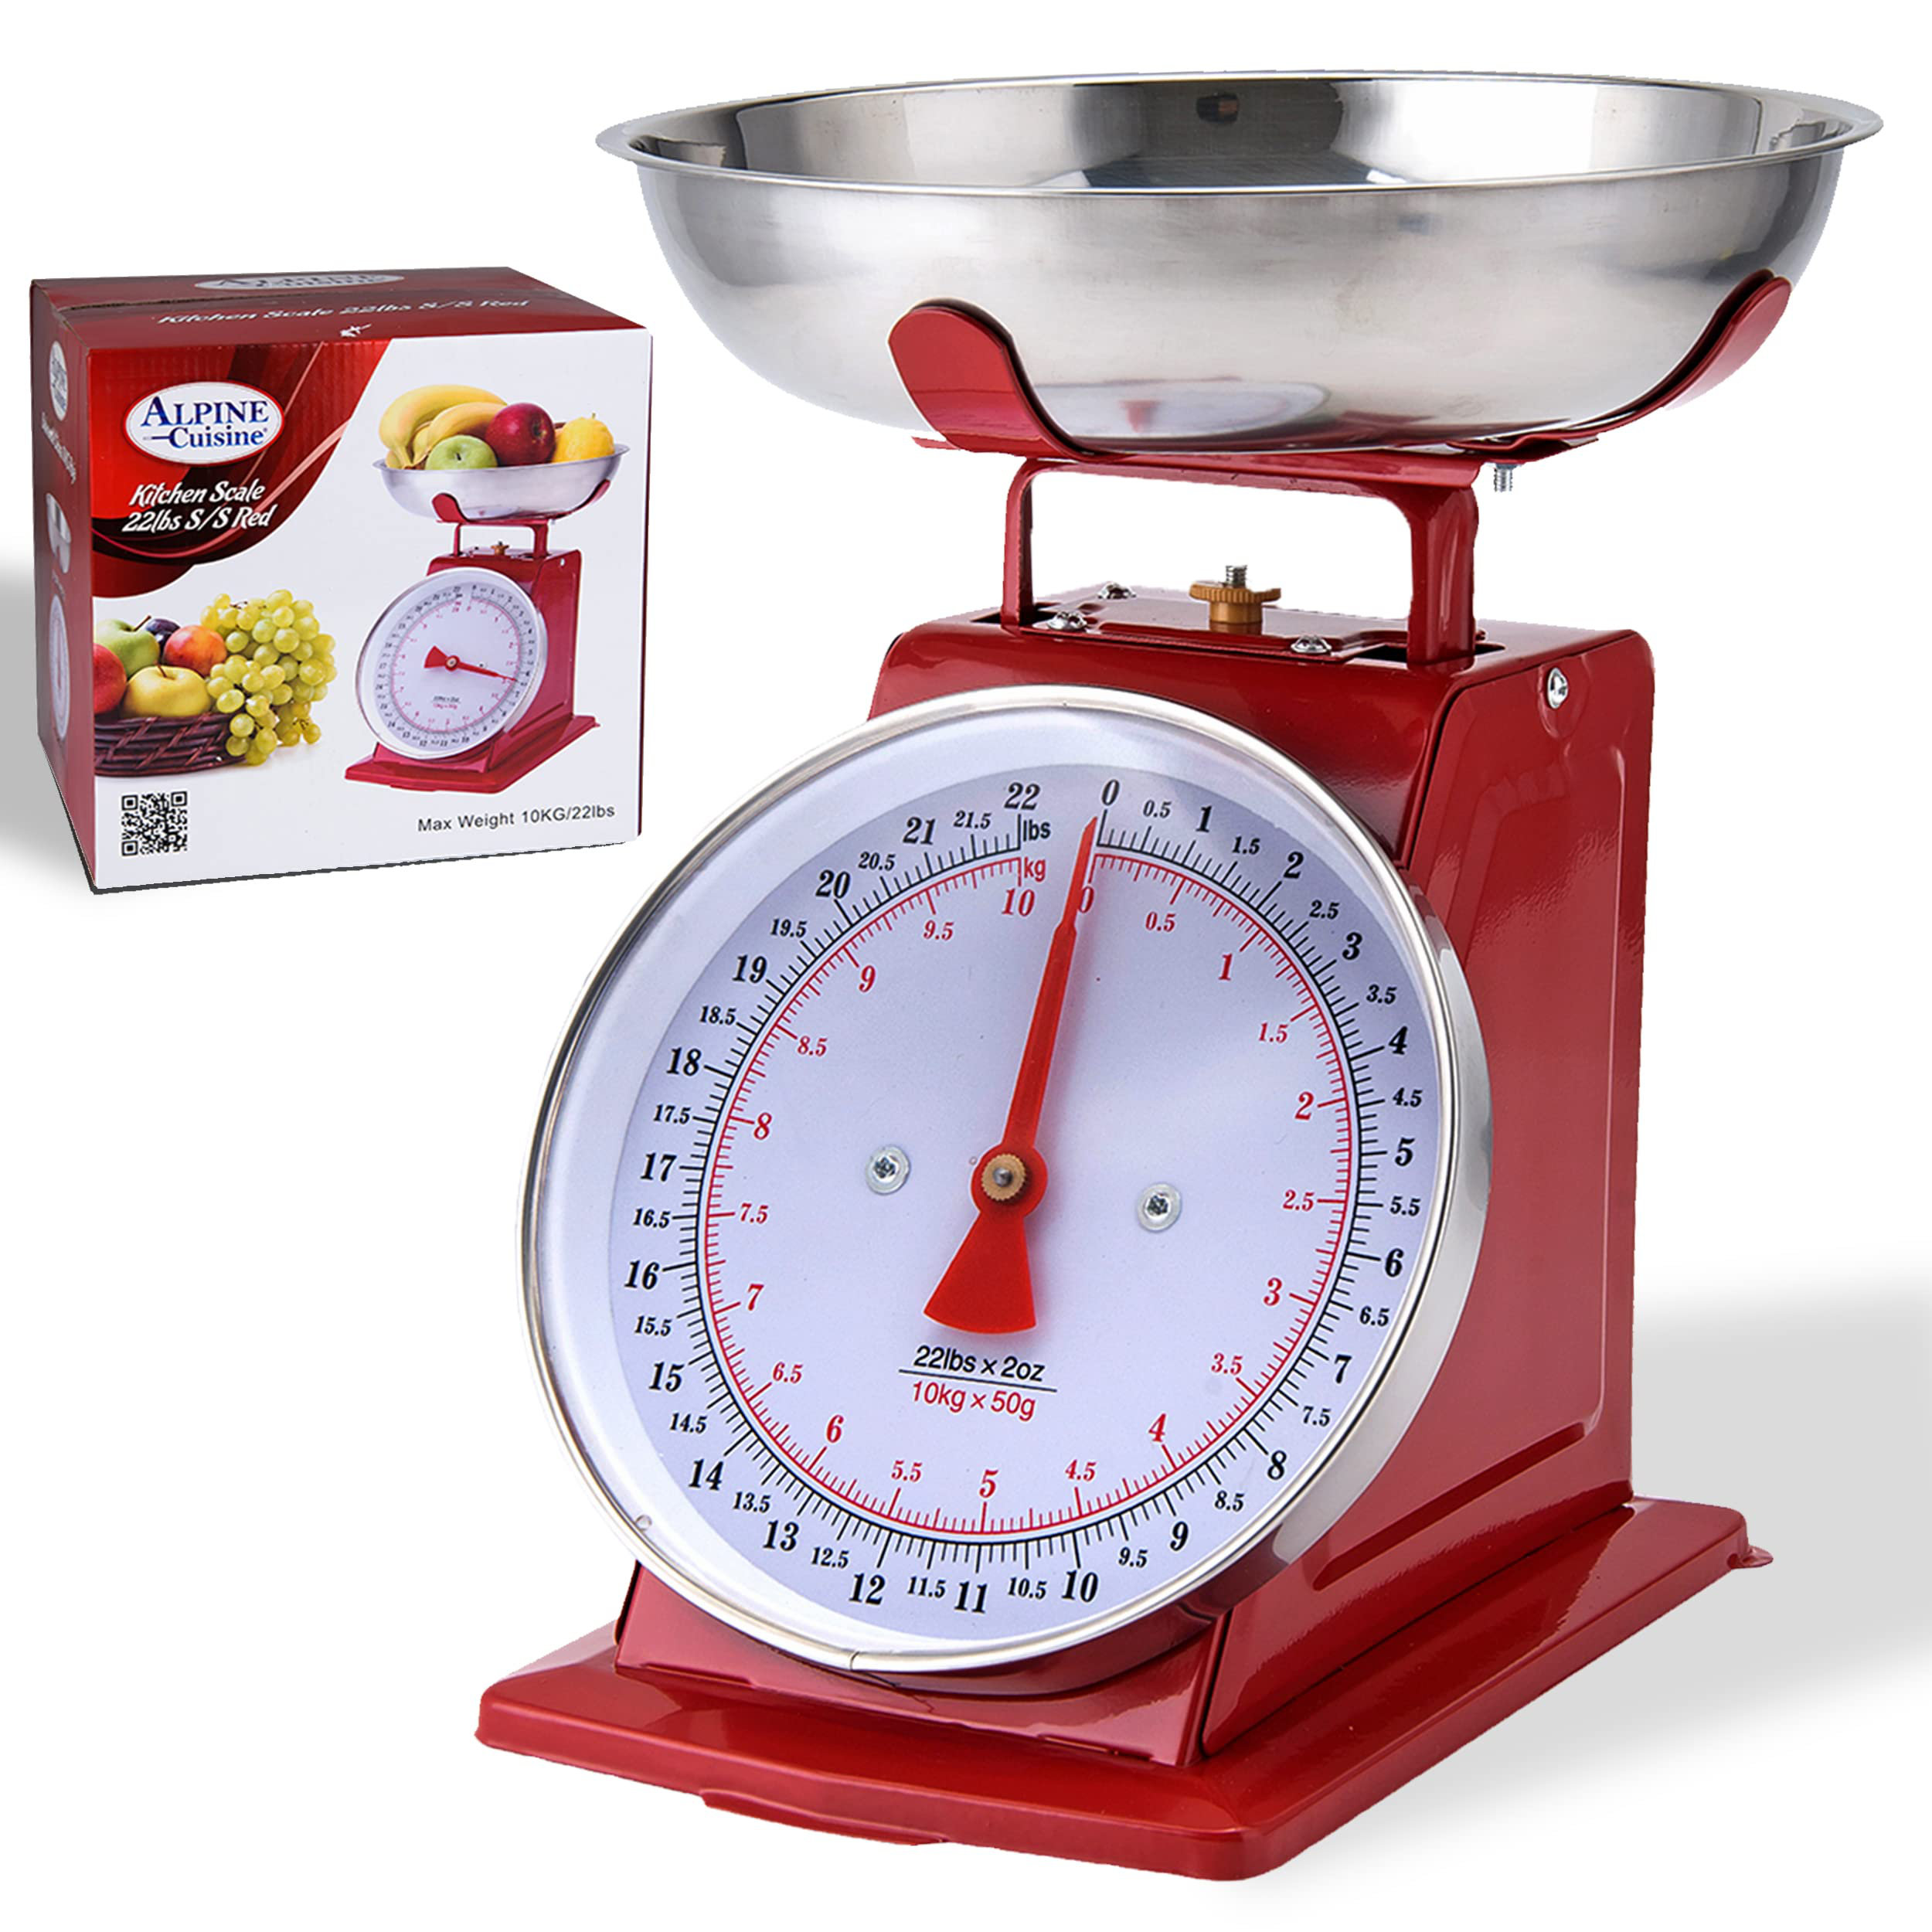 Escali Mercado Mechanical Dial Scale - Stainless Steel - 11 lb